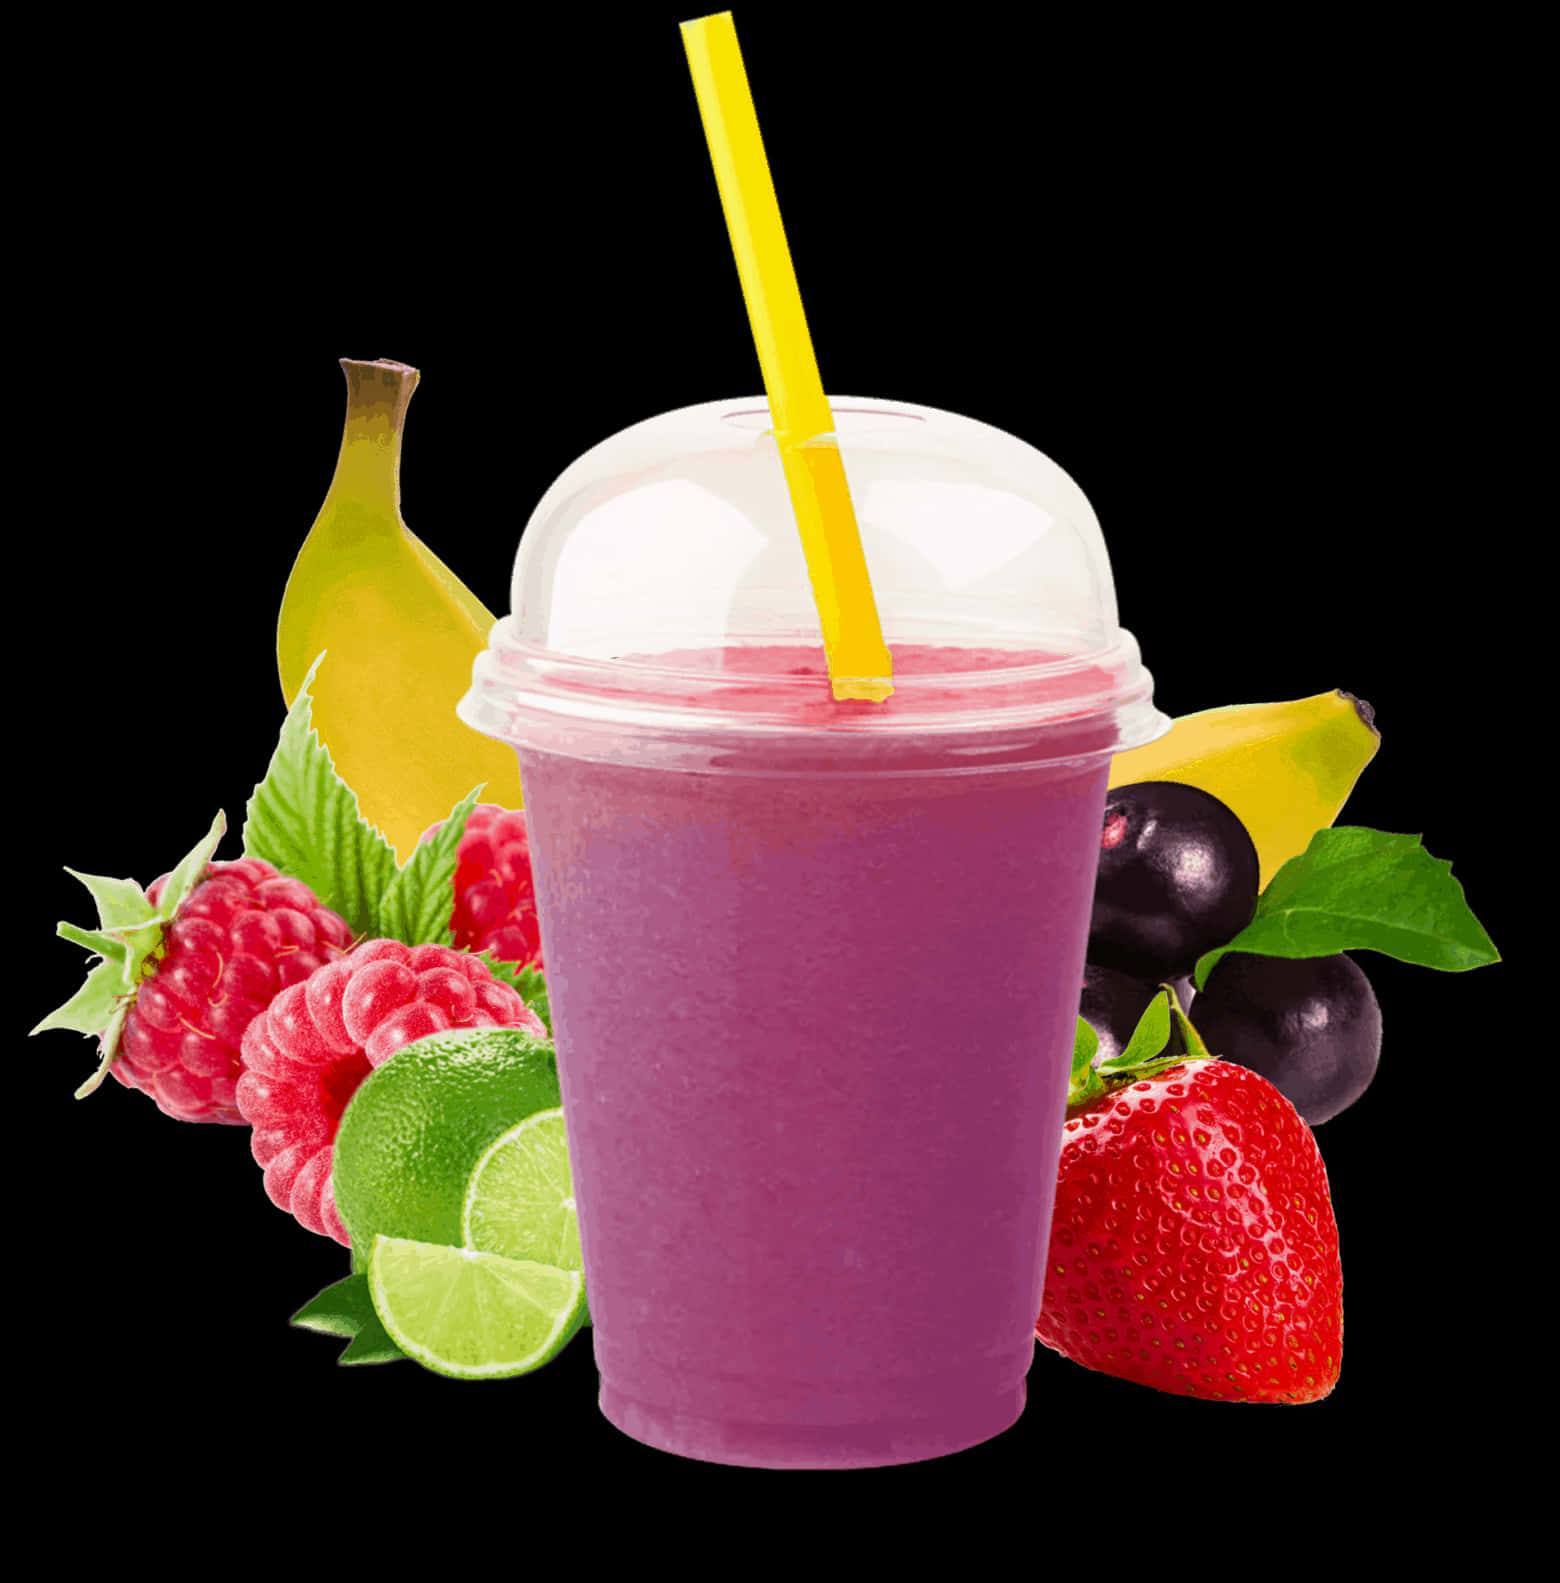 A Purple Smoothie With Straw In A Plastic Cup With Fruit